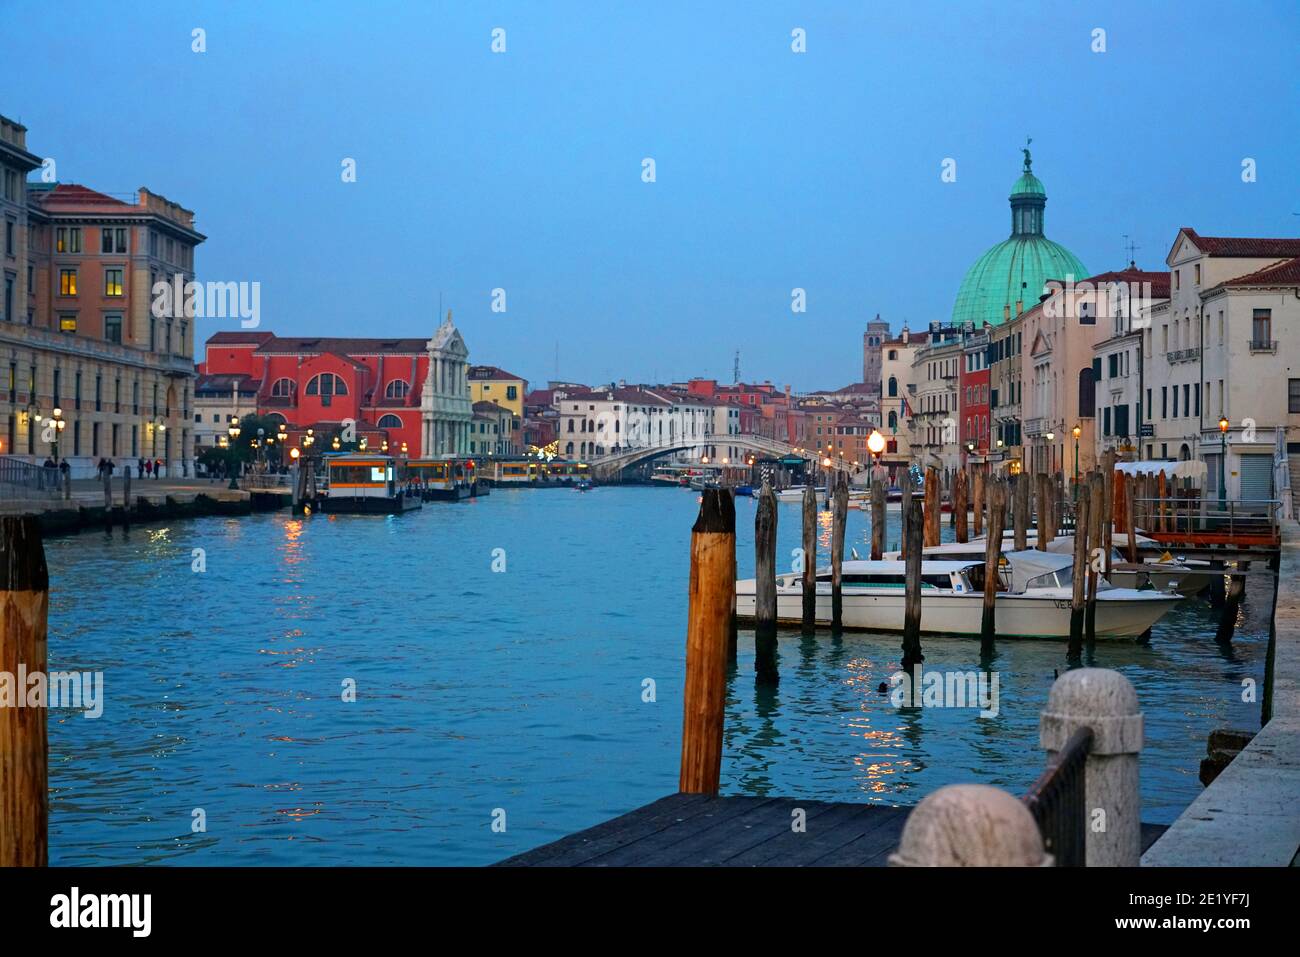 The Grand Canal in Venice, Italy. Stock Photo